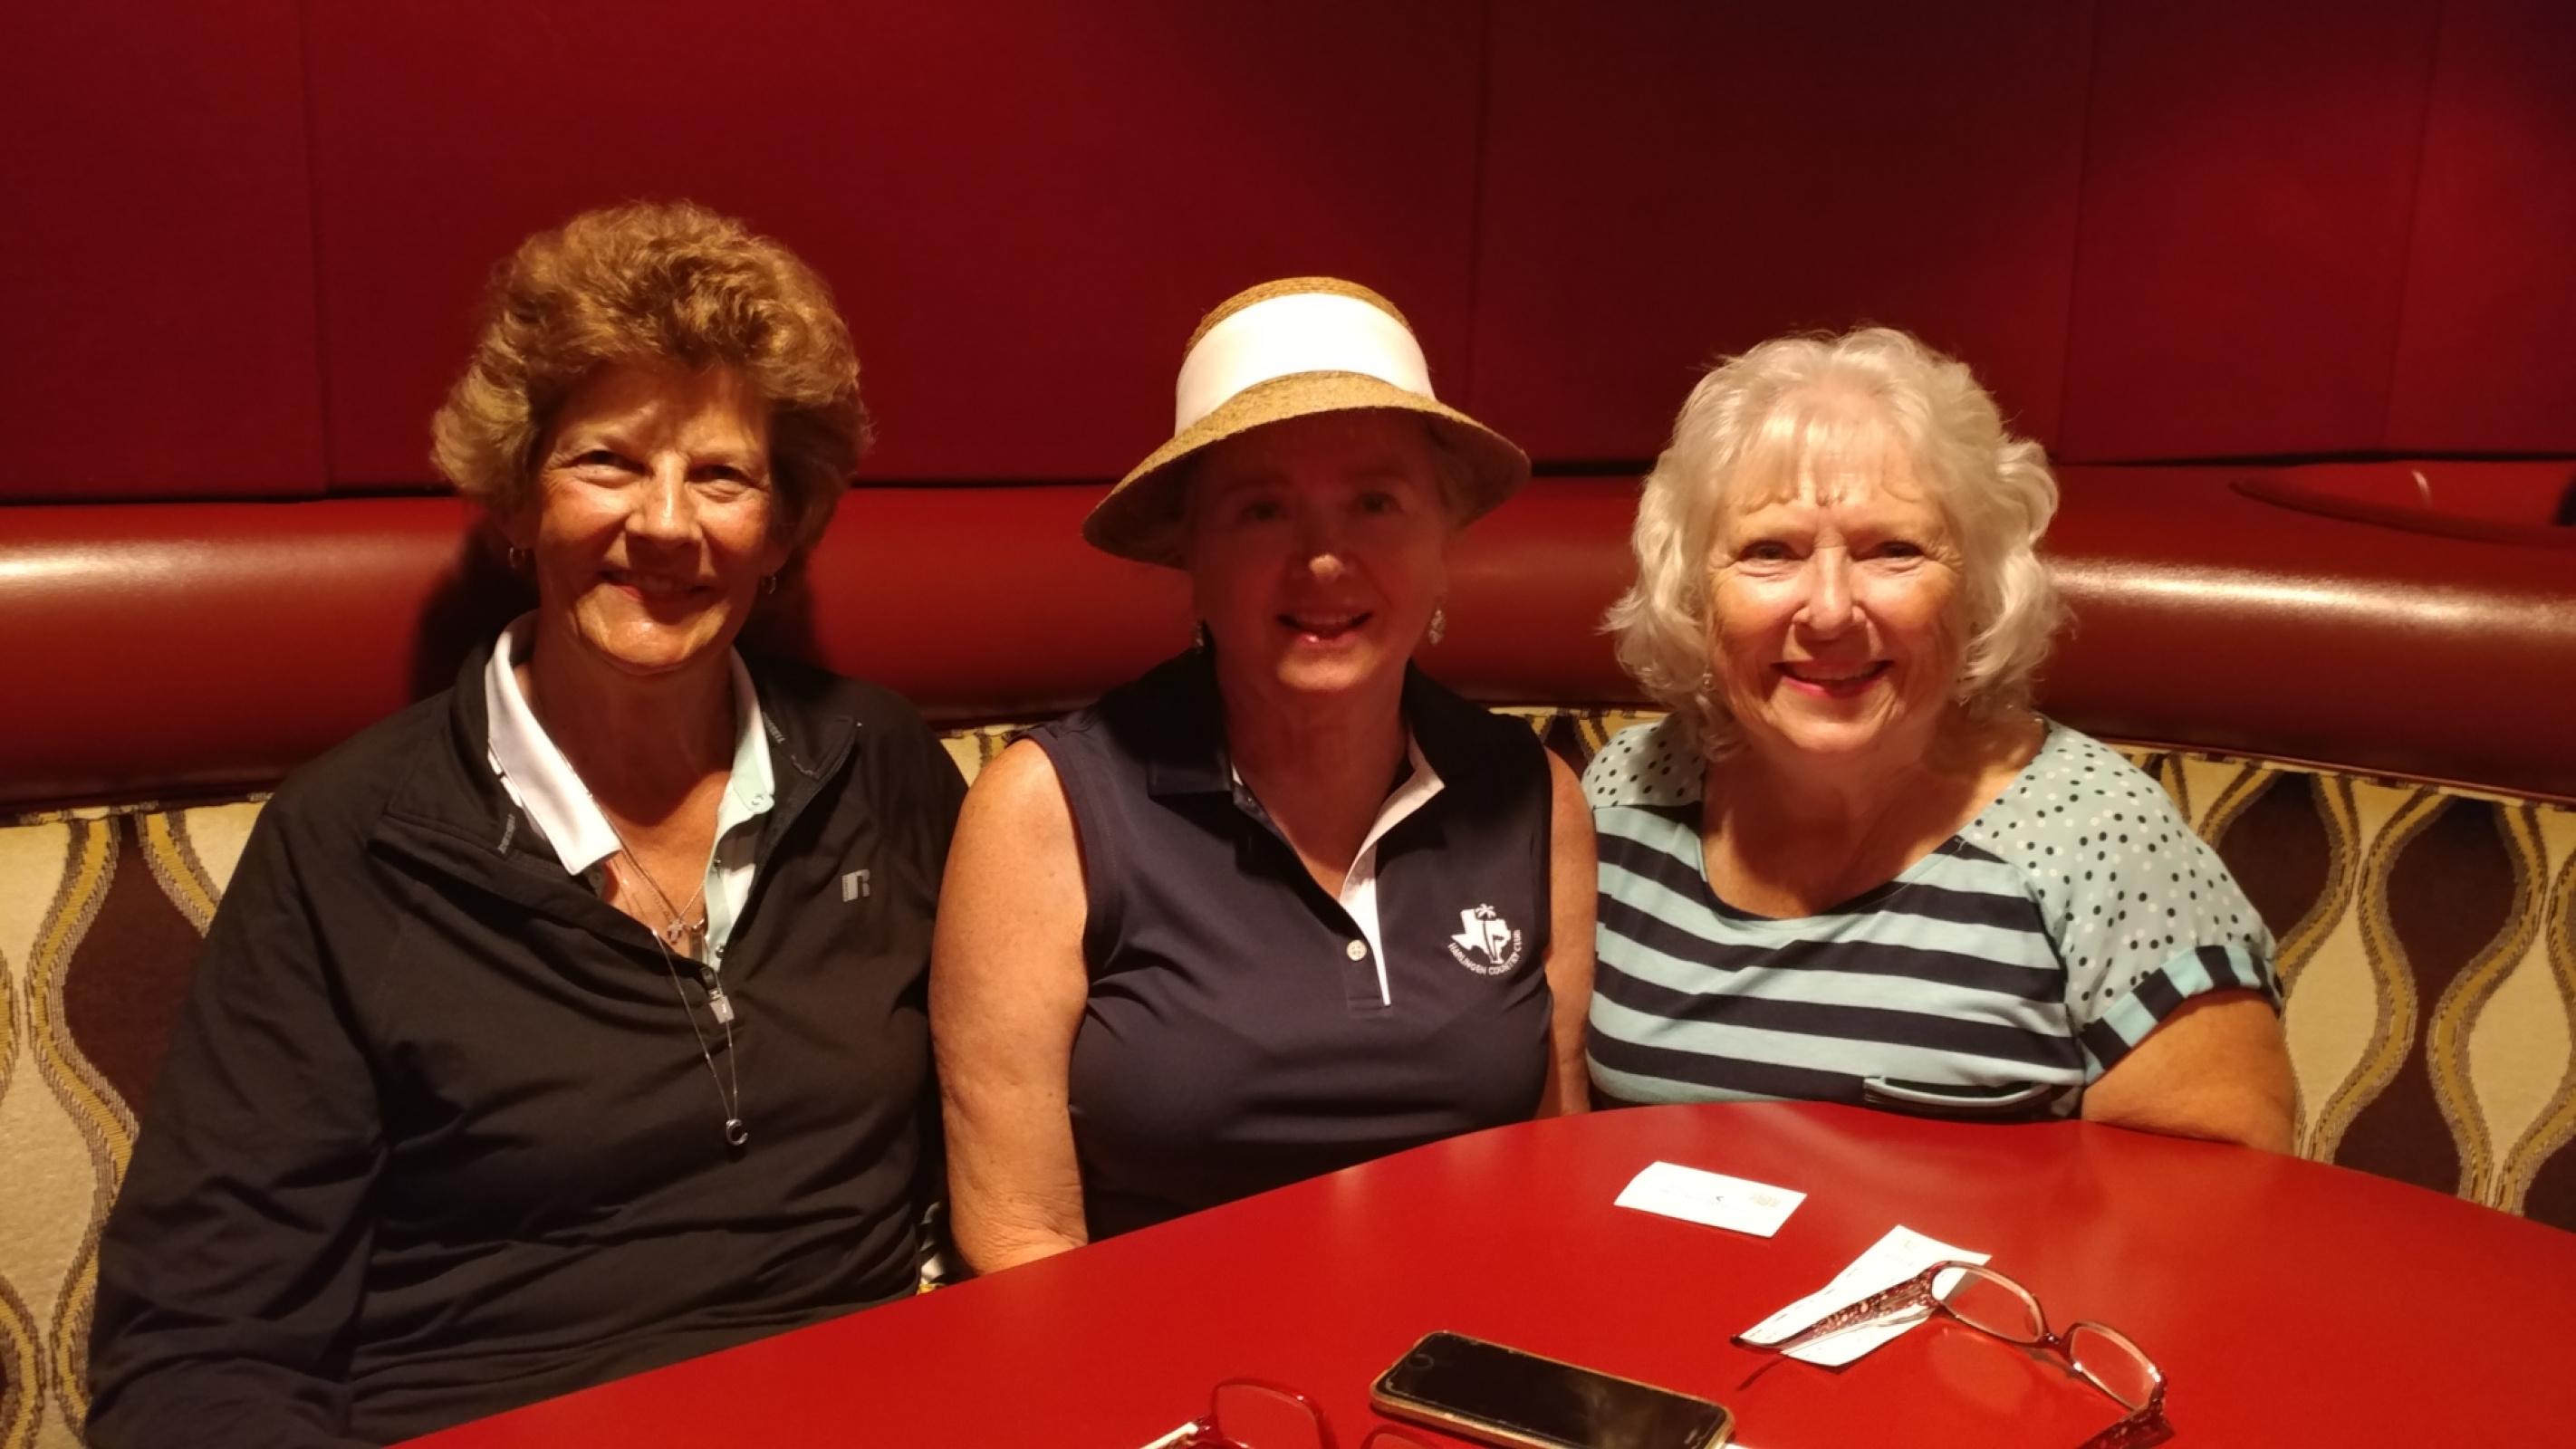 Paula, Susan and Cheryl Hibbitt in Las Vegas at the Donnie and Marie Osmond show may 2018